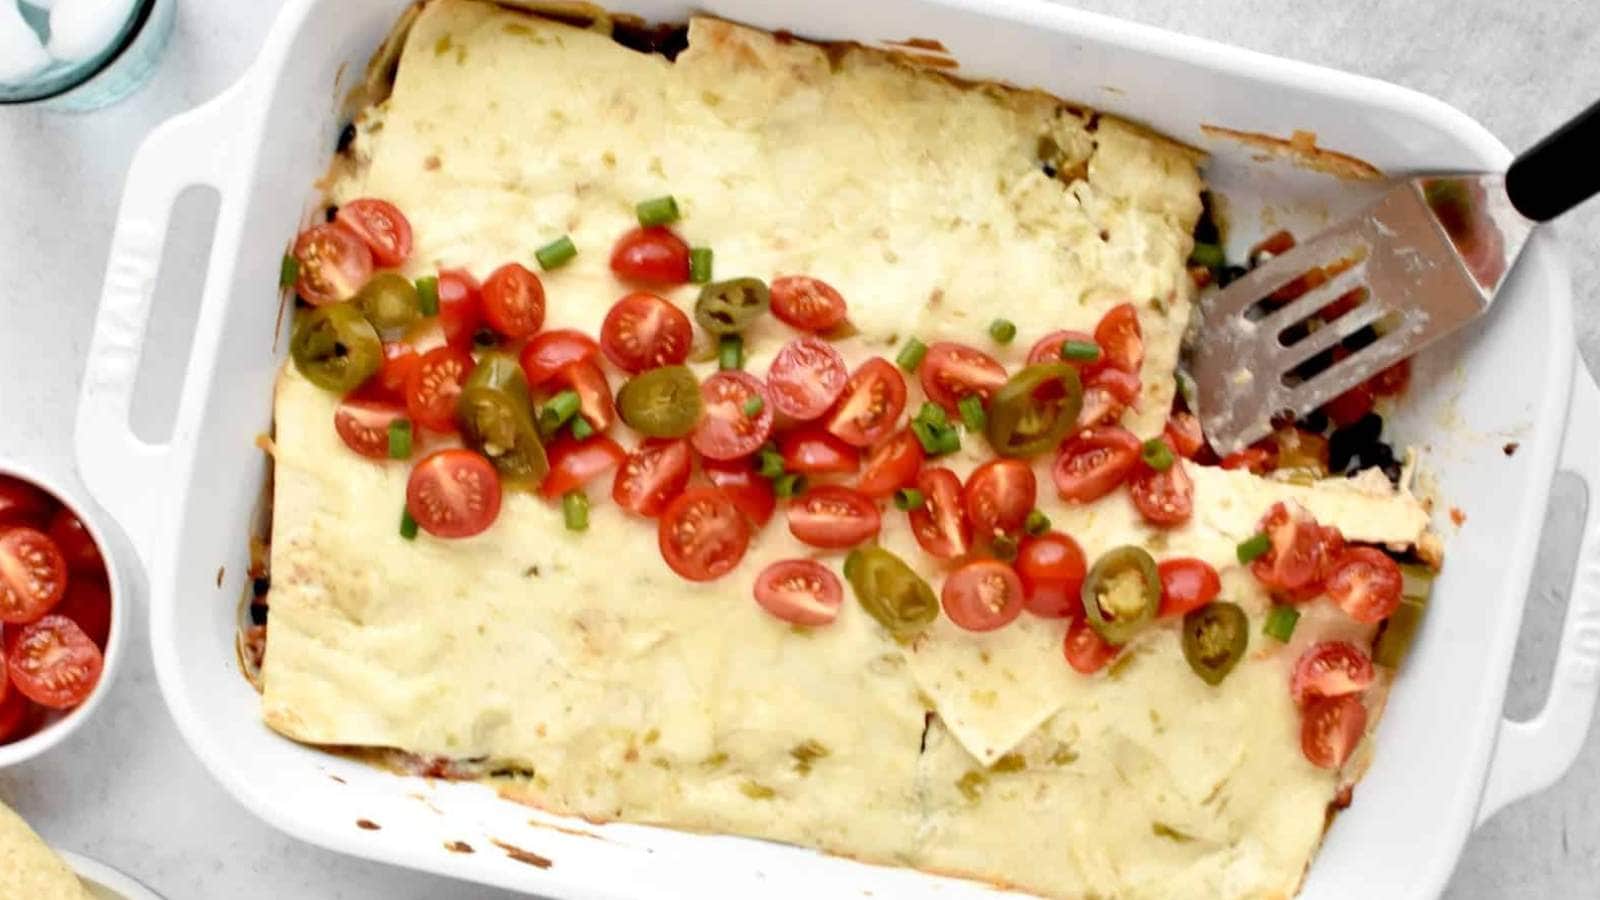 <p>This Sour Cream Chicken Enchilada Casserole is a great weeknight recipe that is sure to become a family favorite. A perfect use for leftover chicken, this is a delicious and simple dinner that will delight your taste buds.</p><p><strong>Get the Recipe: <a href="https://lovefromthetable.com/sour-cream-chicken-enchilada-casserole/" rel="noreferrer noopener">Sour Cream Chicken Enchilada Casserole</a></strong></p>